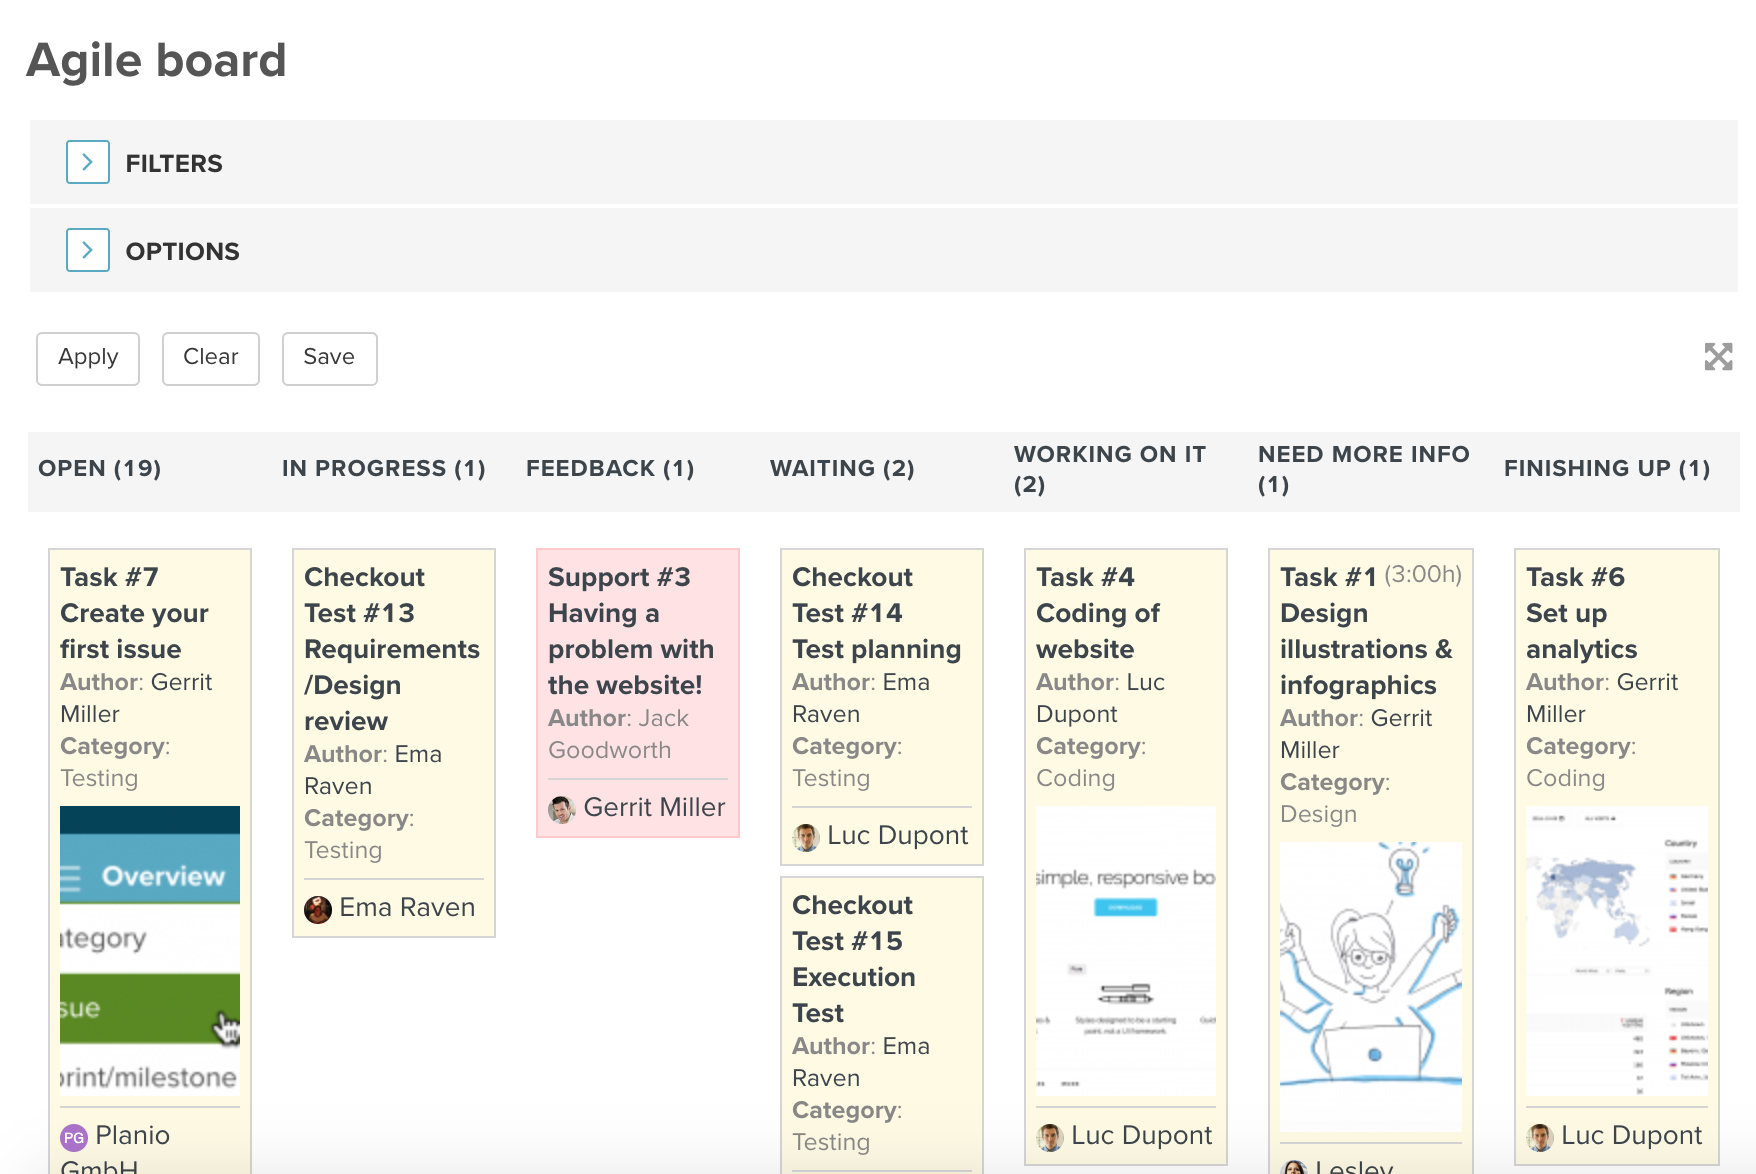 Planio screenshot of an Agile Board coloured according to the issue priorities